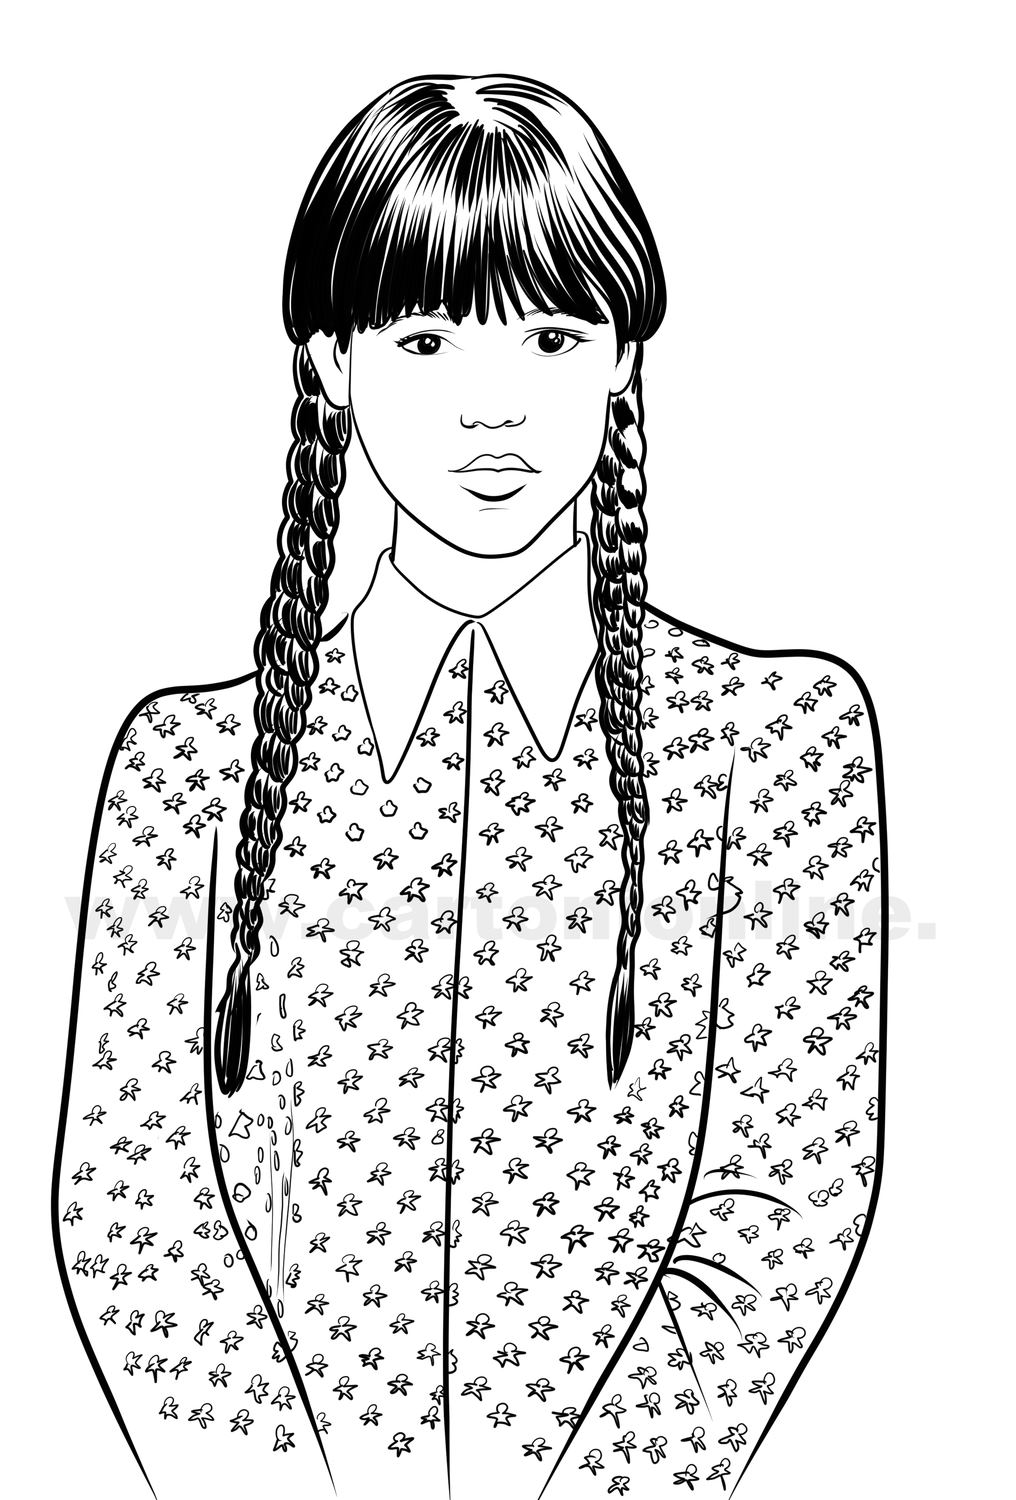 Wednesday Addams (Jenna Ortega) from Wednesday (TV series) coloring pages to print and coloring